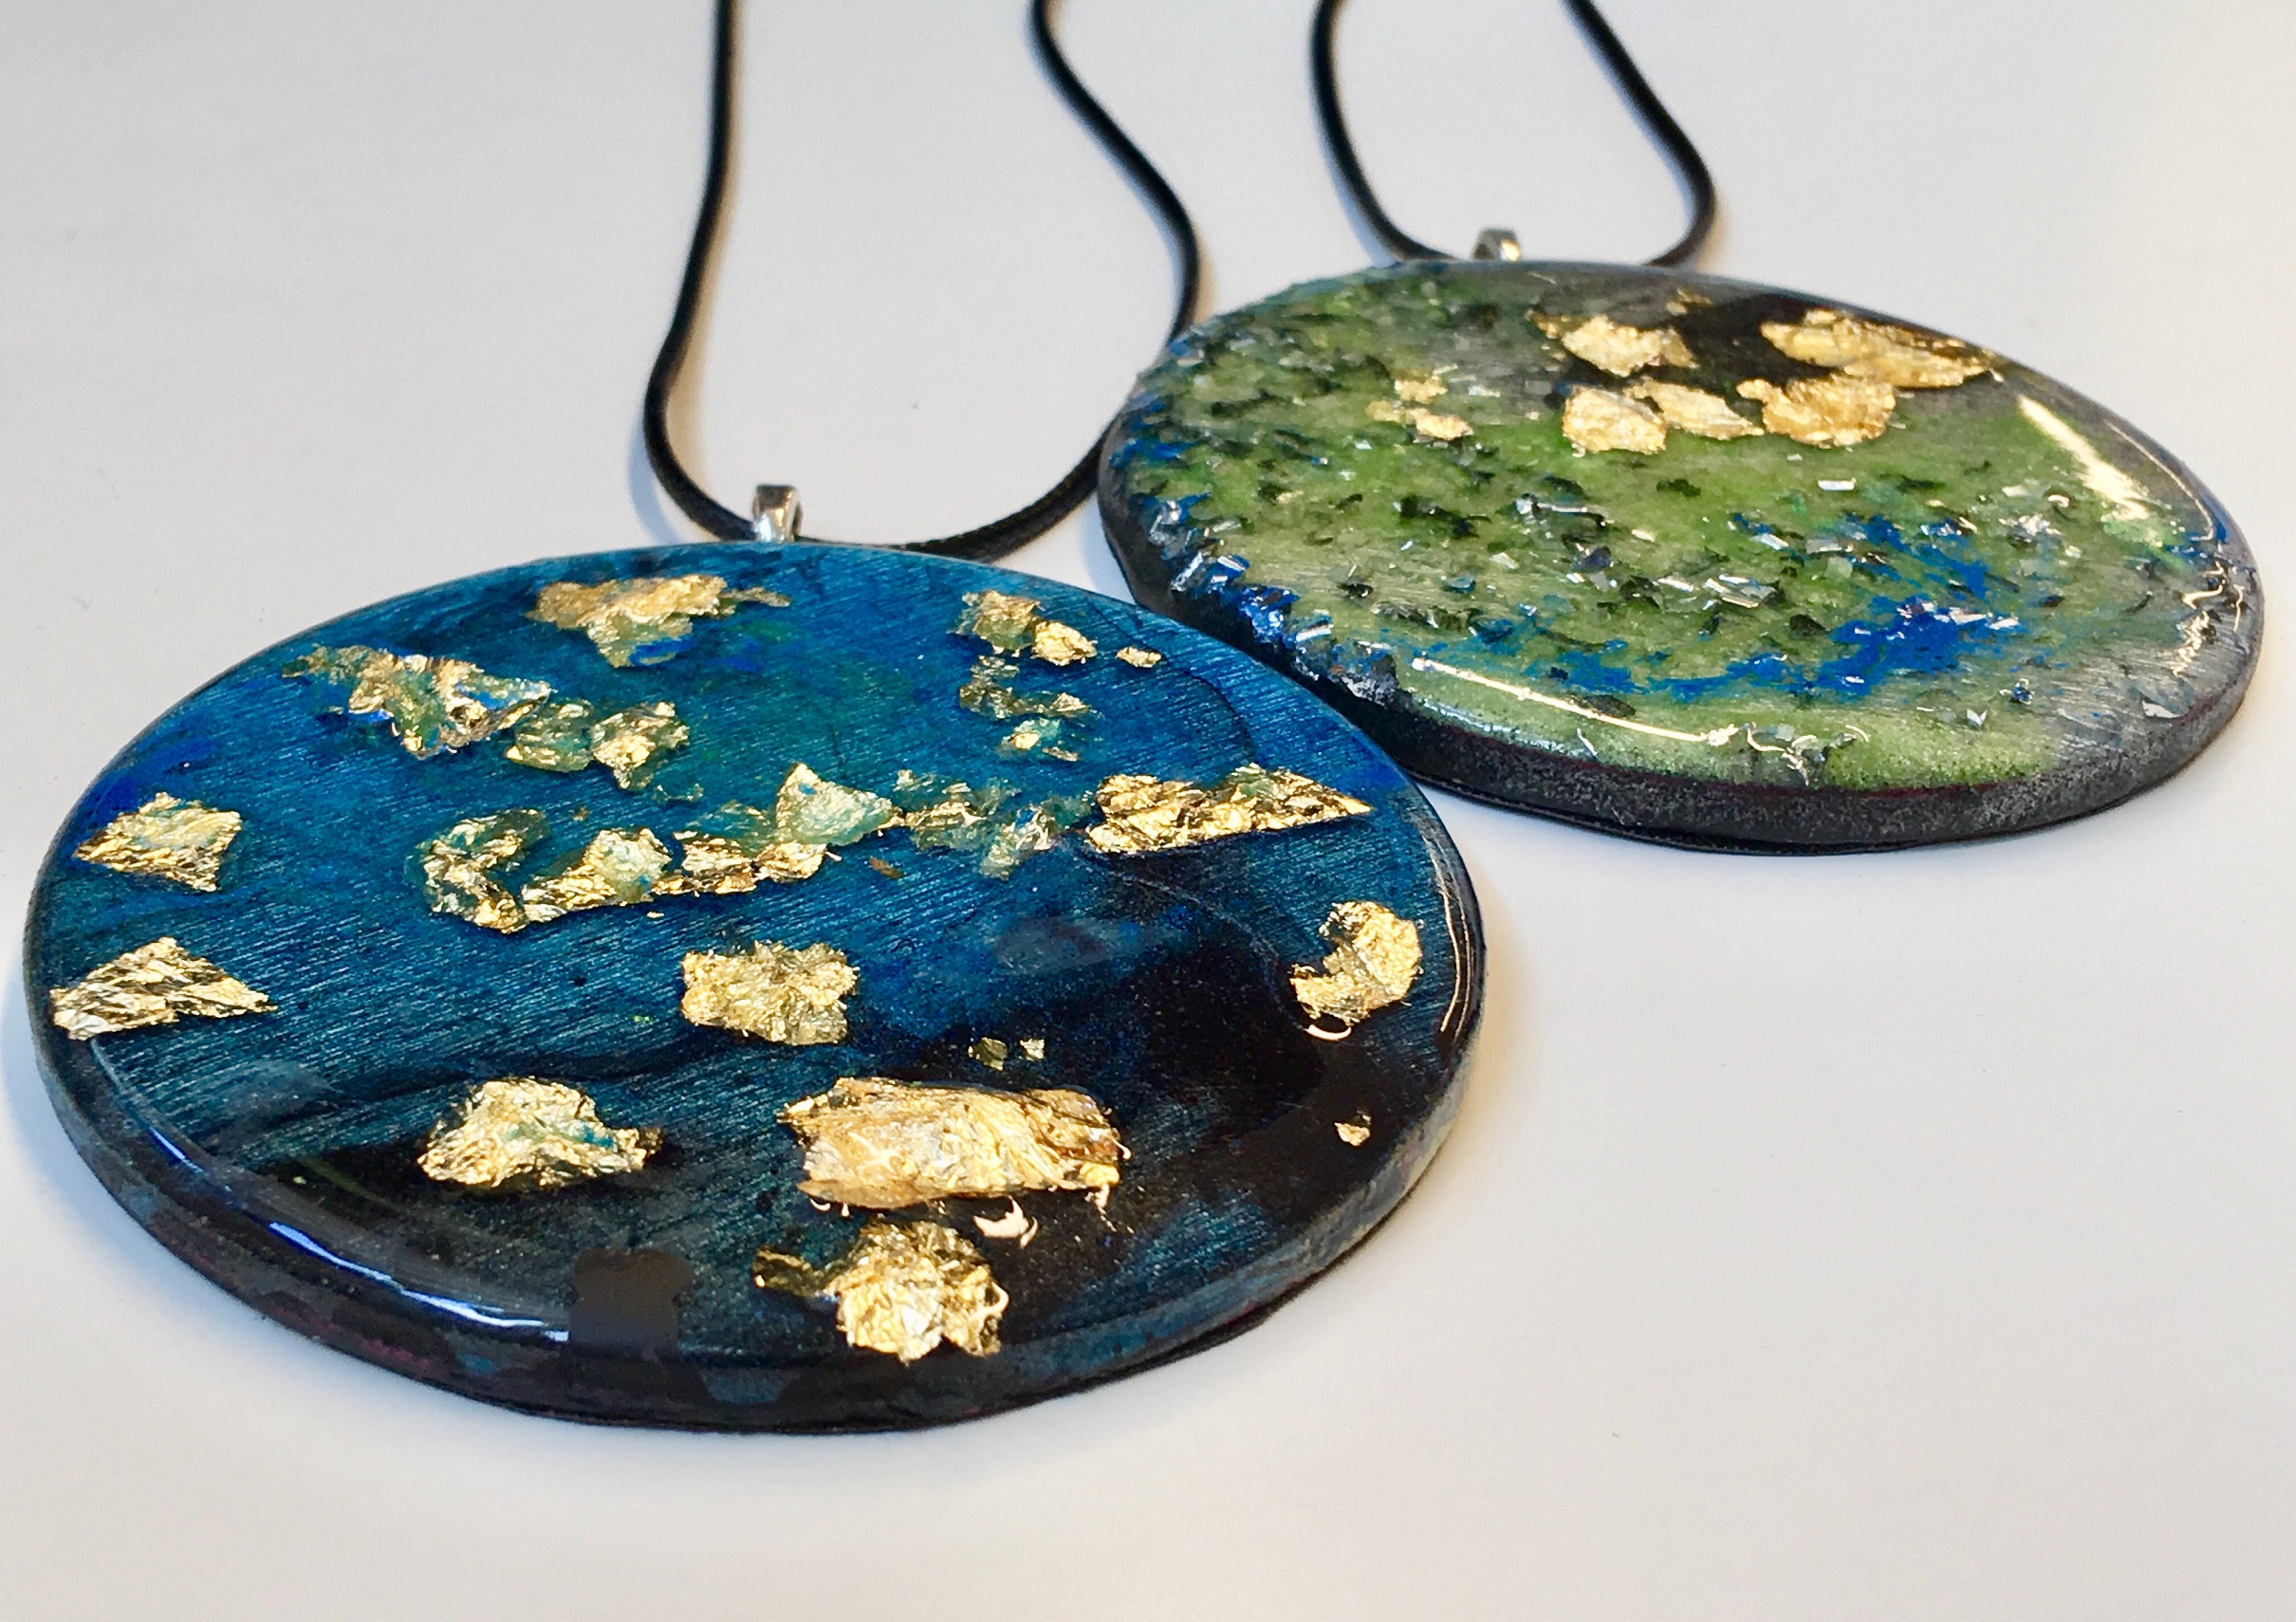 Pendant necklaces by Josie, on sale at The Art House Shop